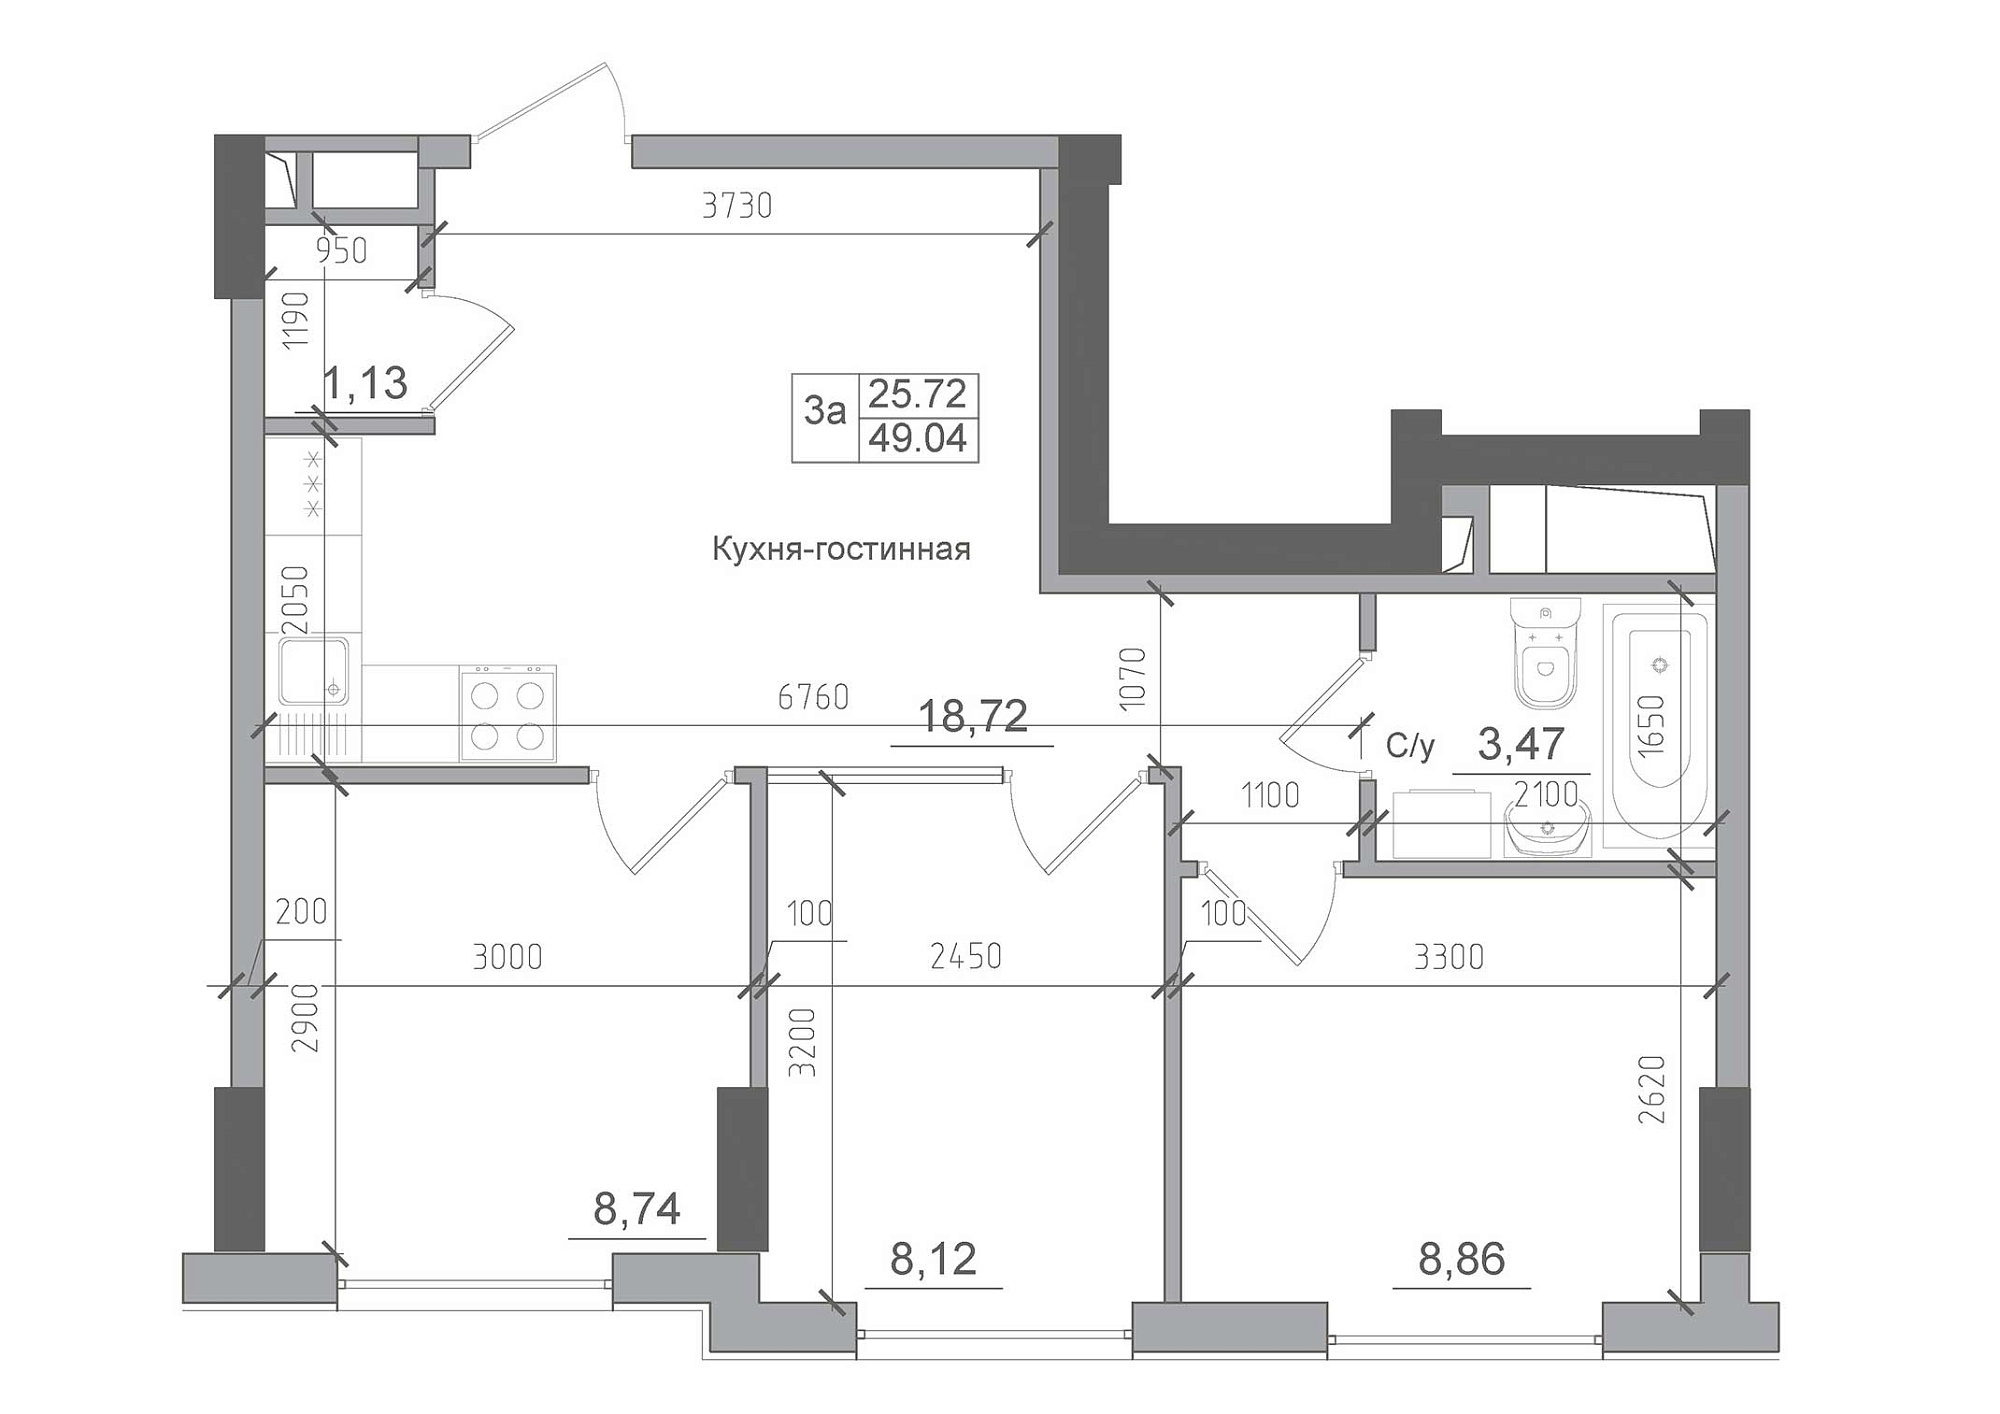 Planning 3-rm flats area 49.04m2, AB-22-08/00007.